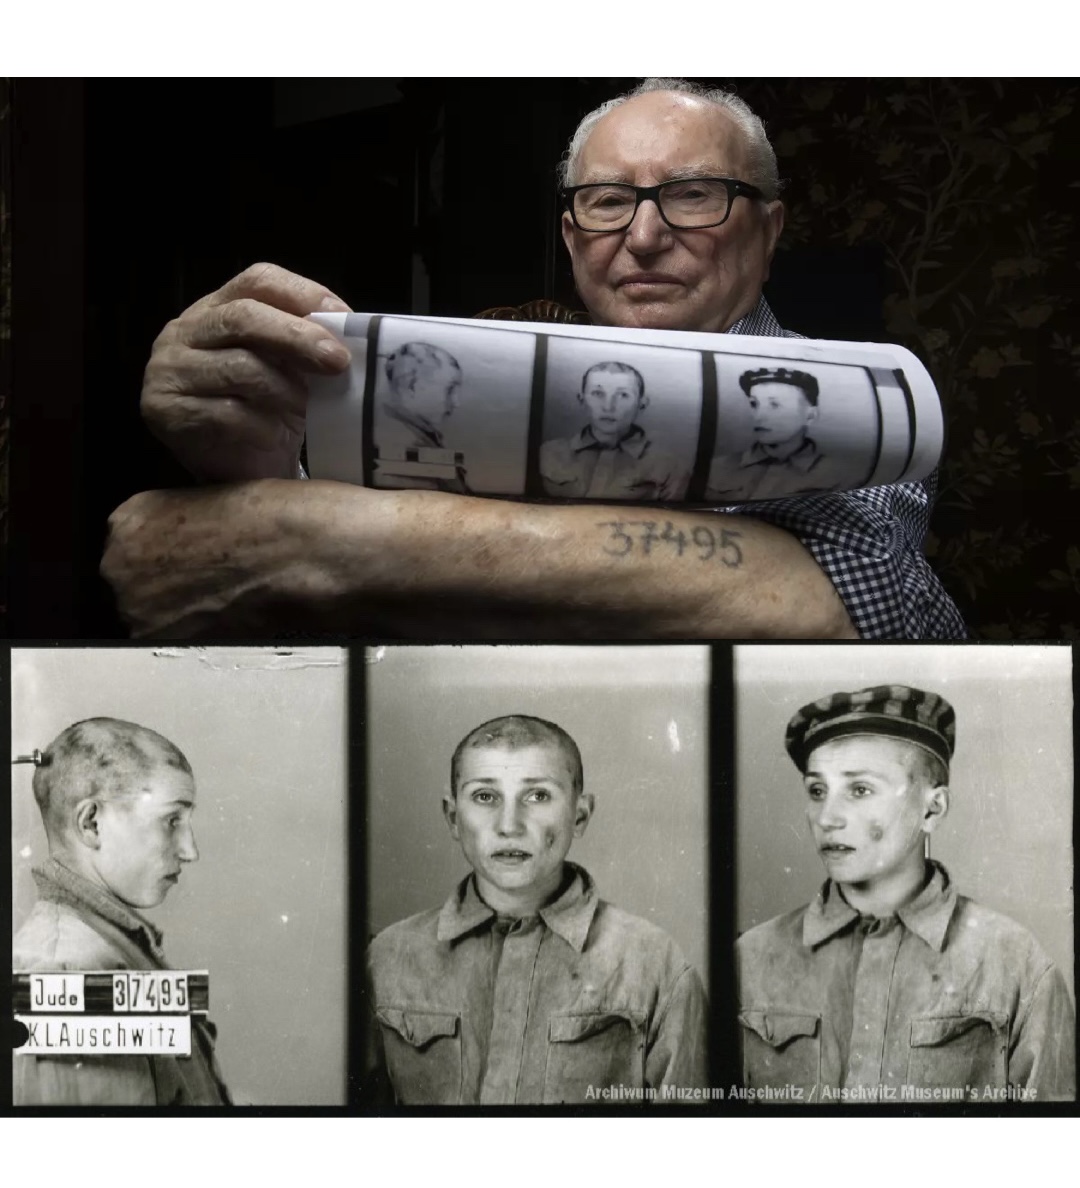 Today, on what would have been his 99th birthday, our hearts and thoughts turn to our dear friend and a #Holocaust #Auschwitz survivor, Ralph Hackman. Rachmil (Ralph) Hackmann was born in 1925 in Radom, Poland. From June 6, 1942, he was a prisoner #37495 at Auschwitz. Ralph…